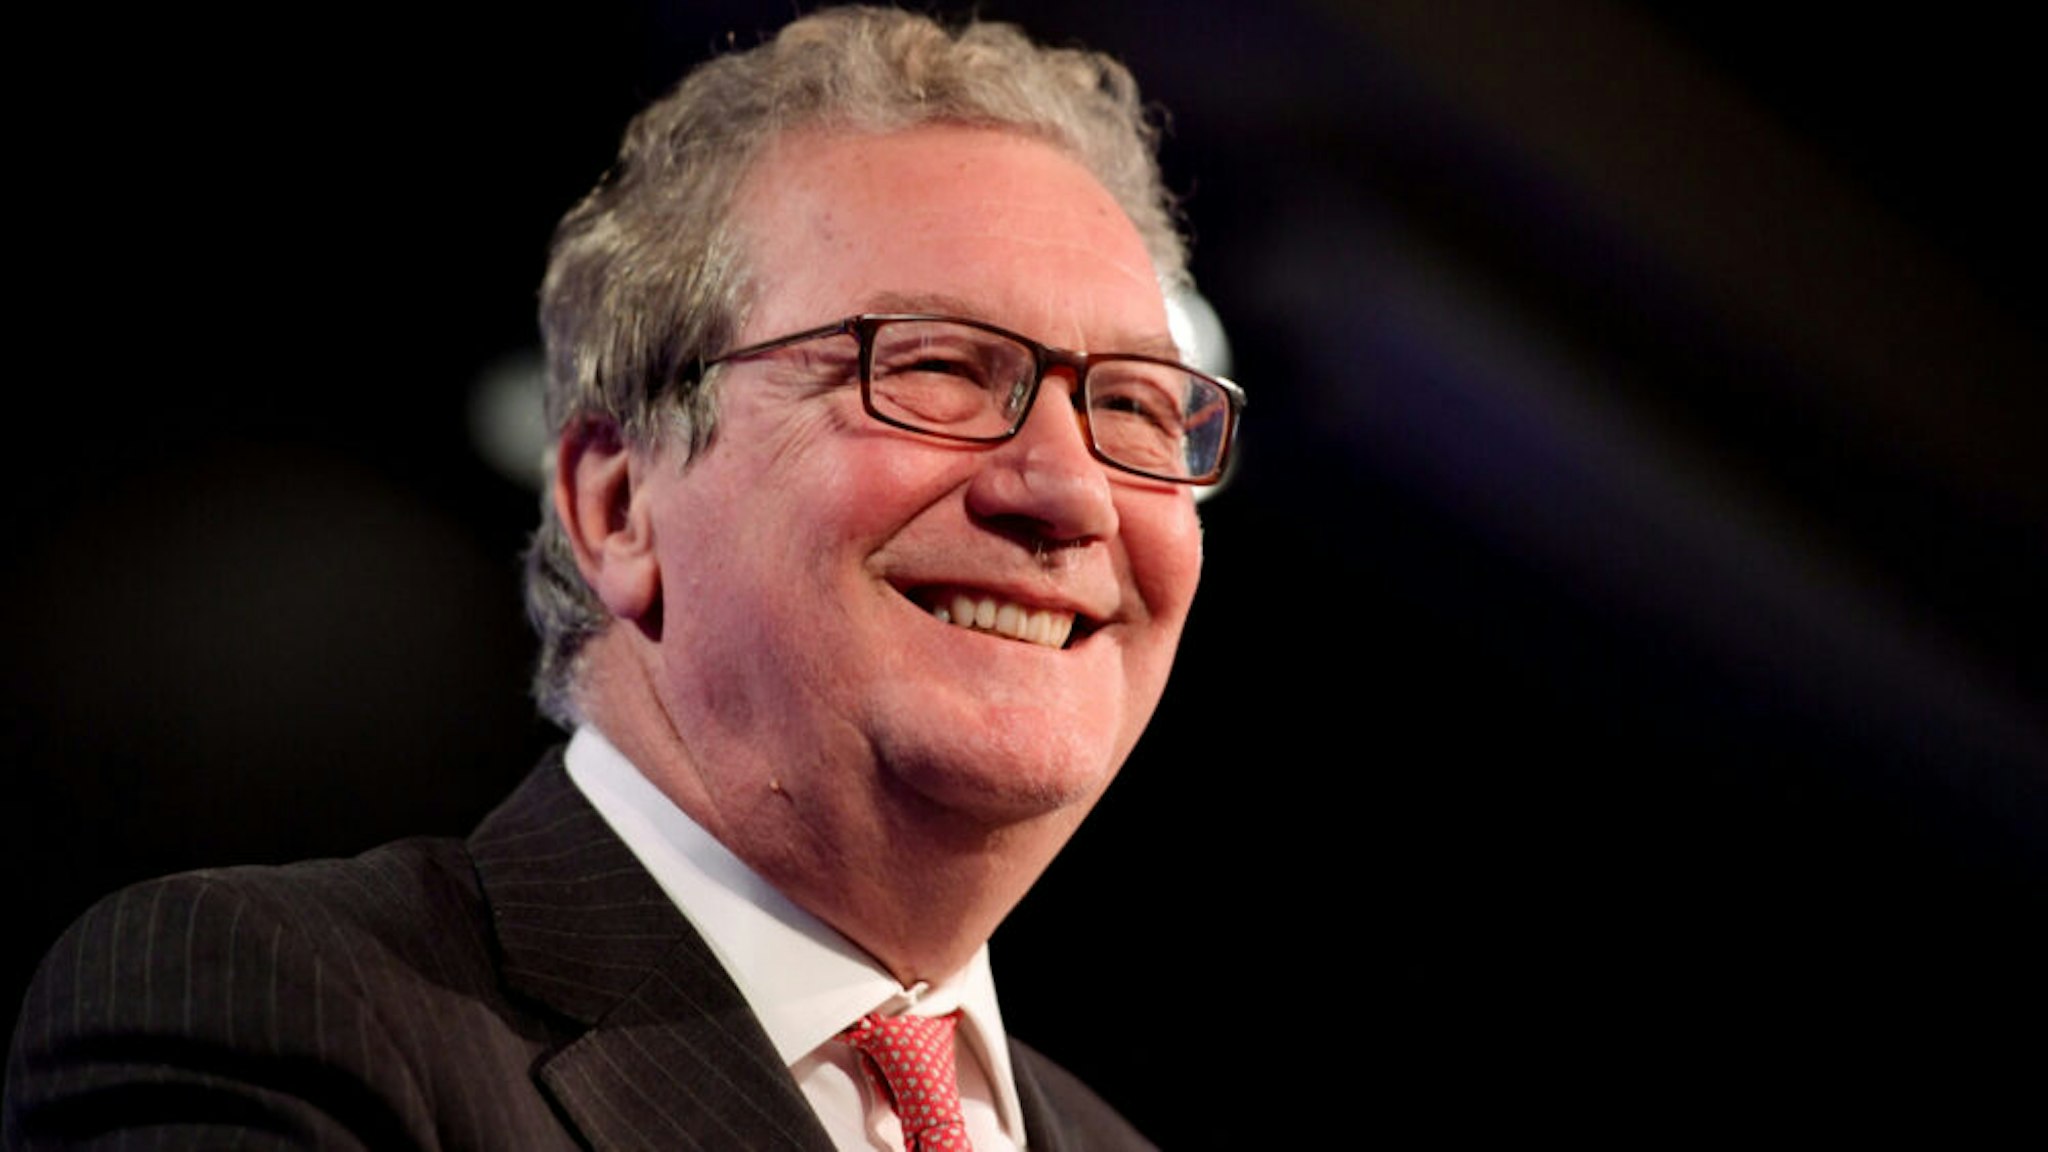 CANBERRA, AUSTRALIA - NOVEMBER 12: Former Foreign Minister Alexander Downer speaks at National Press Club on November 12, 2019 in Canberra, Australia. Alexander Downer was Australia's longest serving Foreign Minister and is the former High Commissioner to the United Kingdom. Downer said that the loss of Britain from the EU will be a loss for Australia.